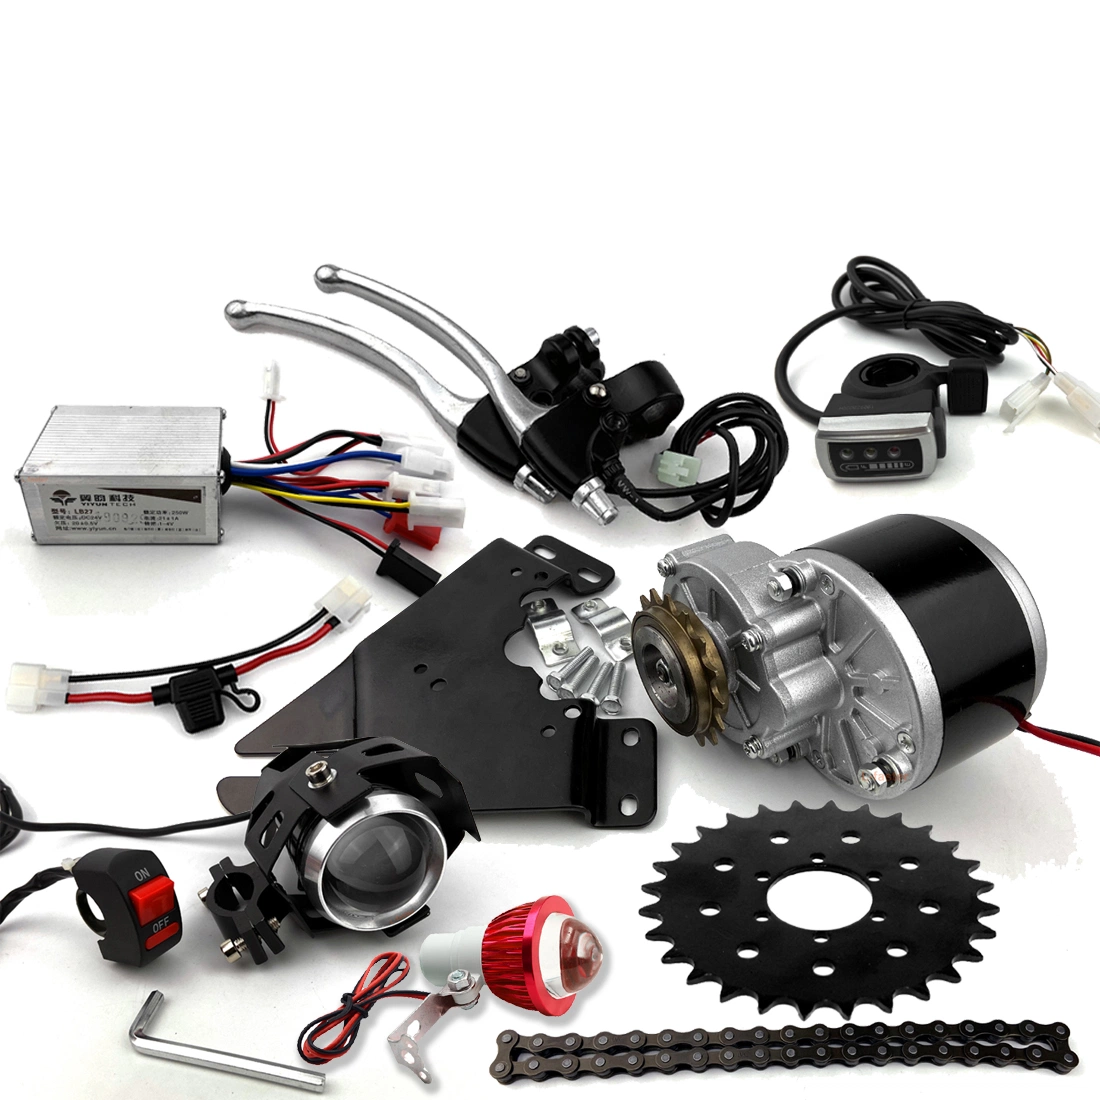 Electric Bicycle 24V 250W Wheel Hub Motor Electric Bike Cycle Conversion Kit for Sale Power Gear